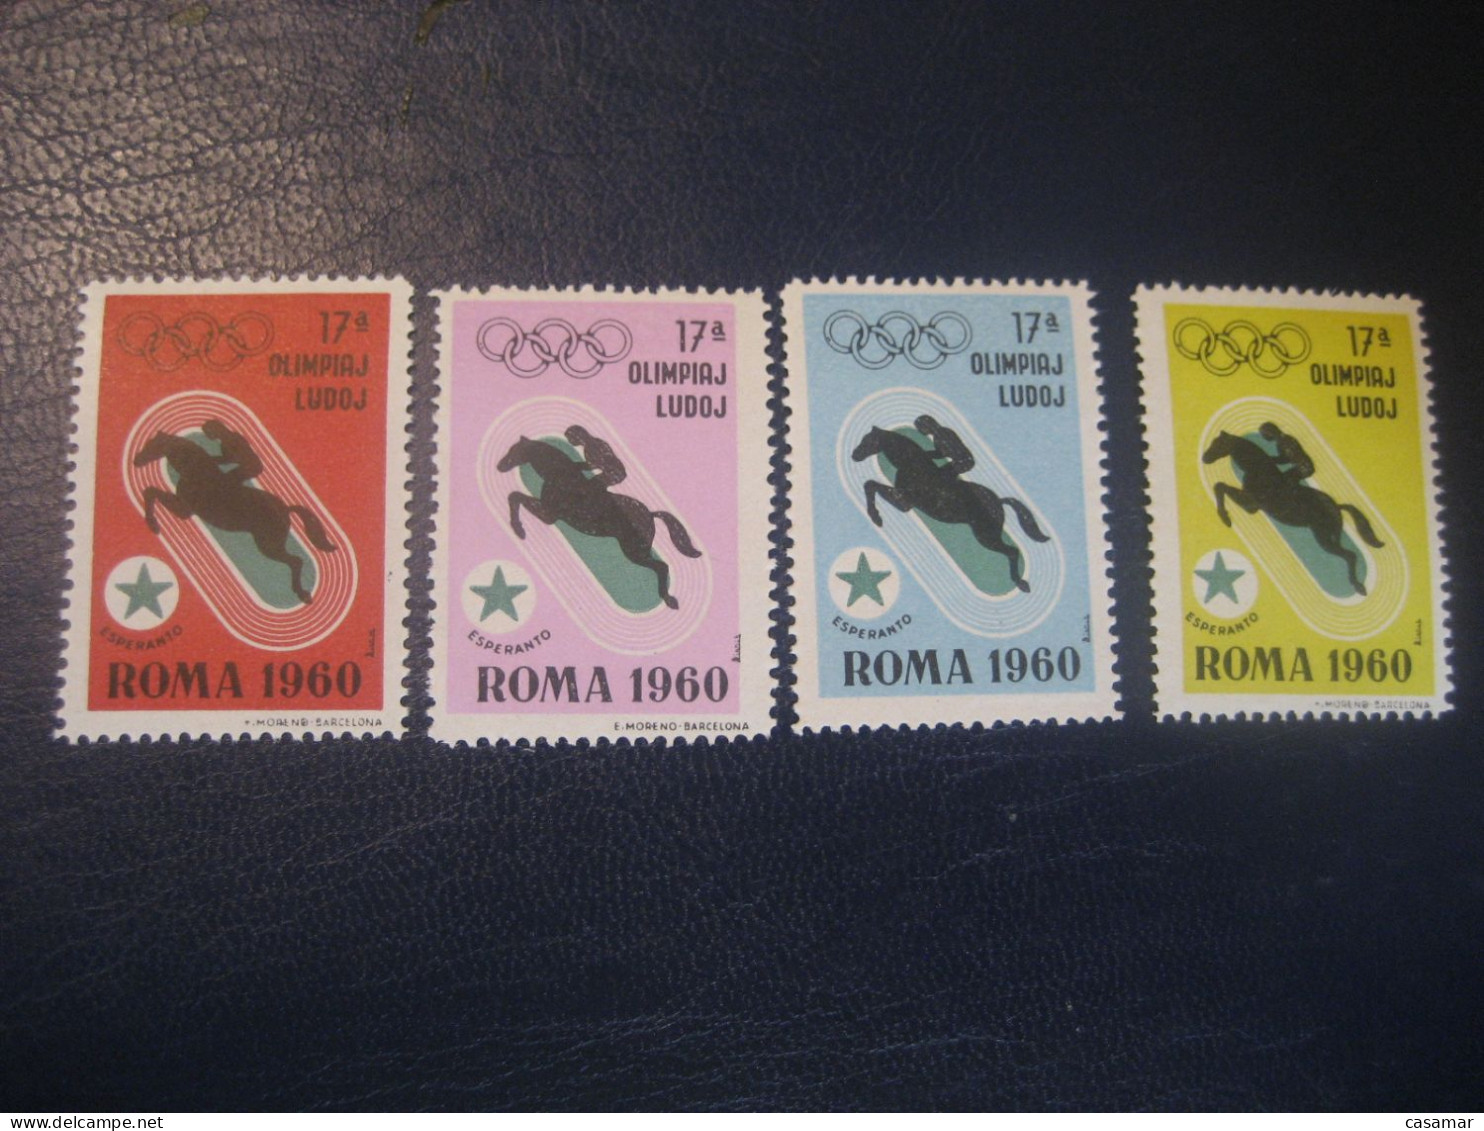 ROMA 1960 Equestrian Equitation Horse Olympic Games Olympics Esperanto 4 Poster Stamp Vignette ITALY Spain Label - Horses